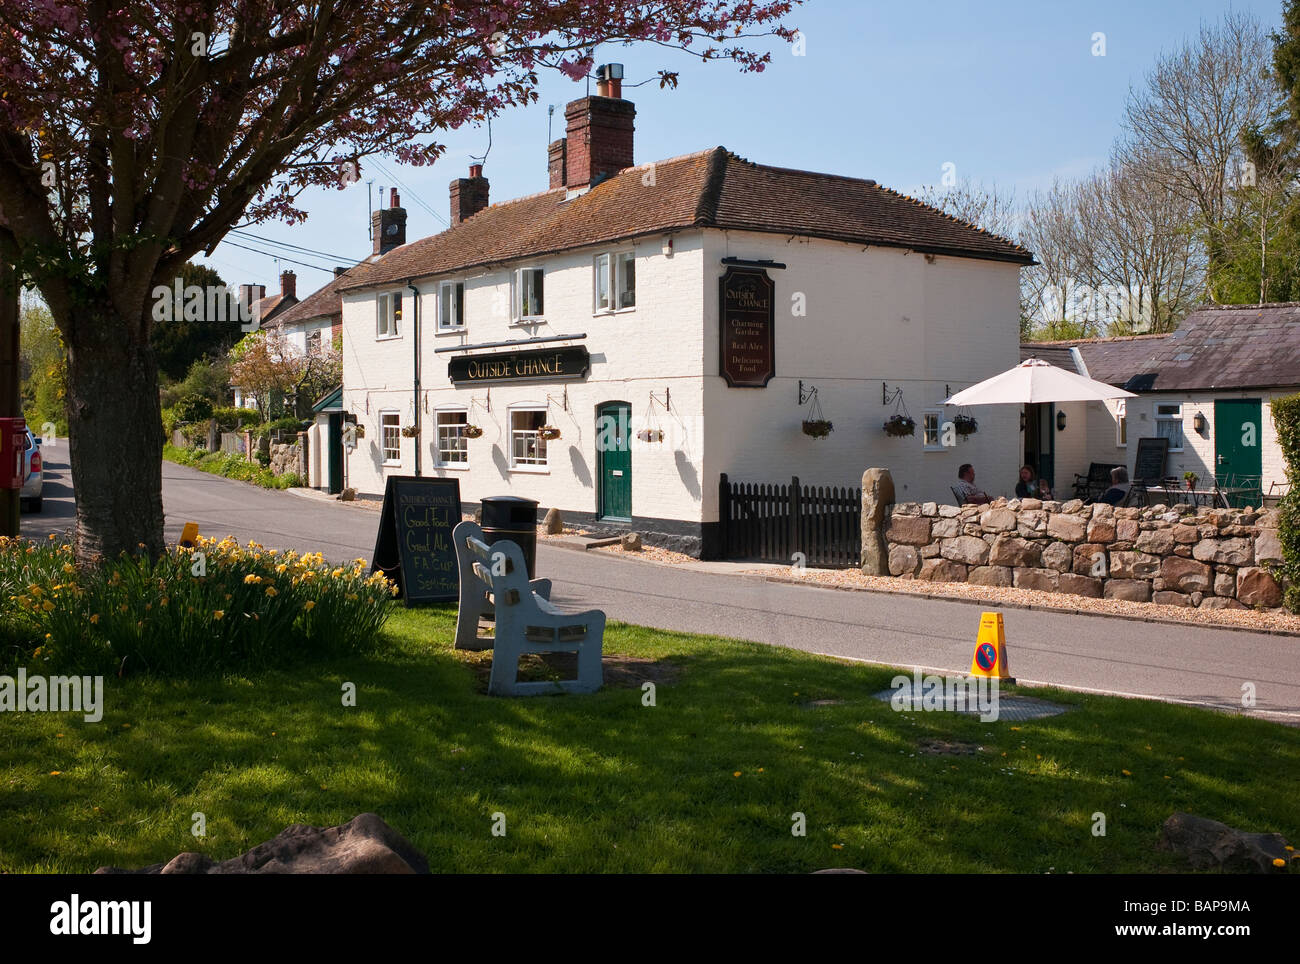 The "Outside Chance" village inn in Manton Marlborough Wiltshire with horse racing associations Stock Photo